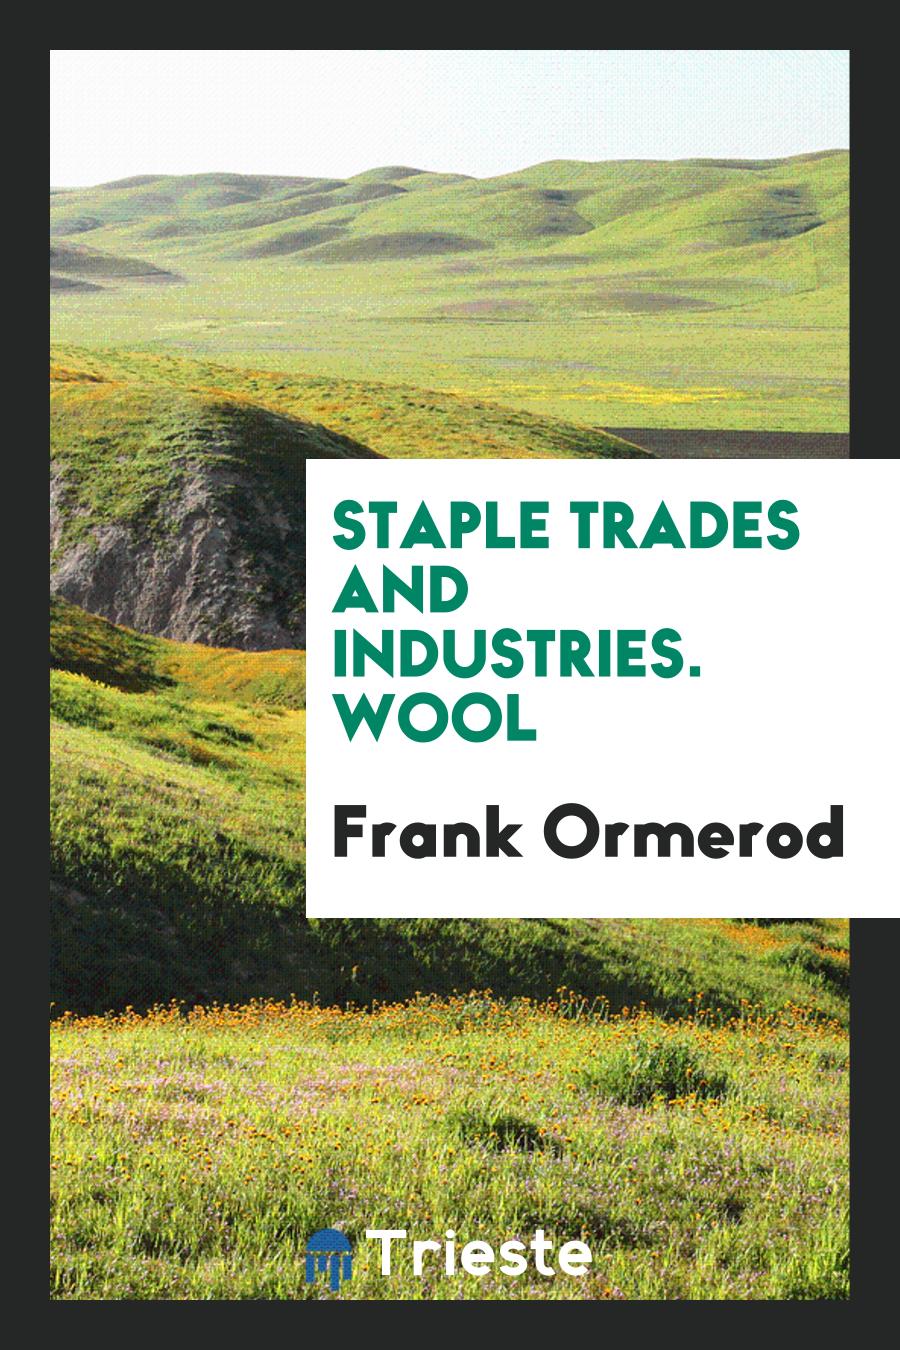 Staple Trades and Industries. Wool